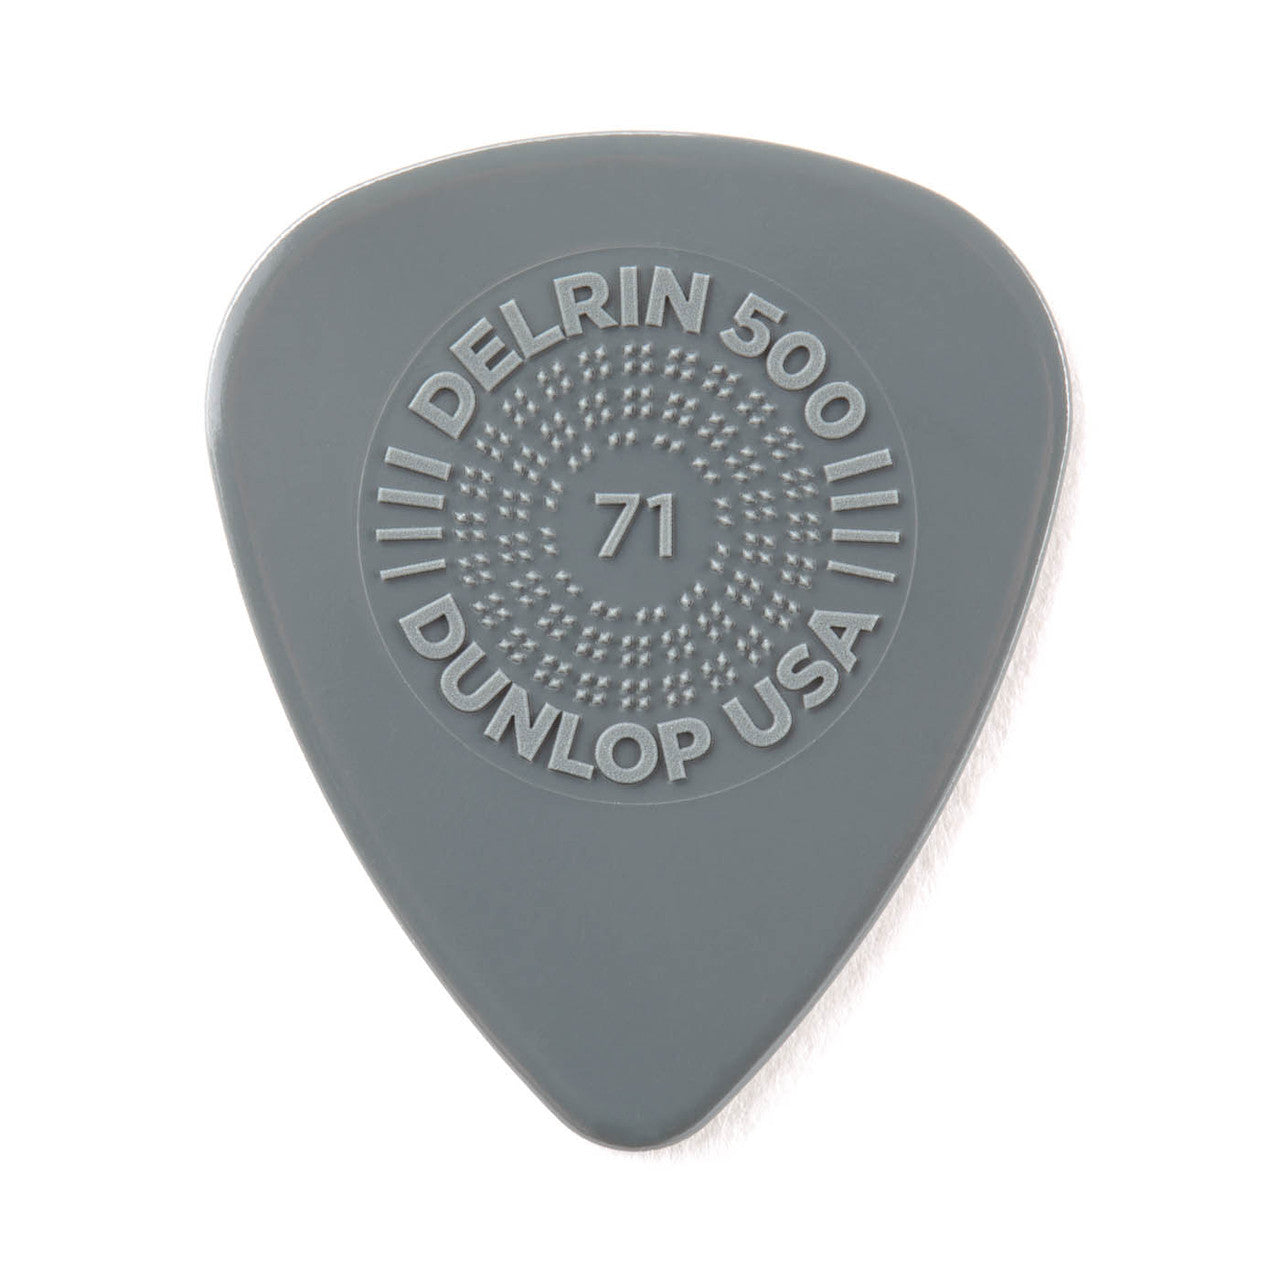 Gibson Original Delrin nut 【未着用品】 おもちゃ・ホビー・グッズ